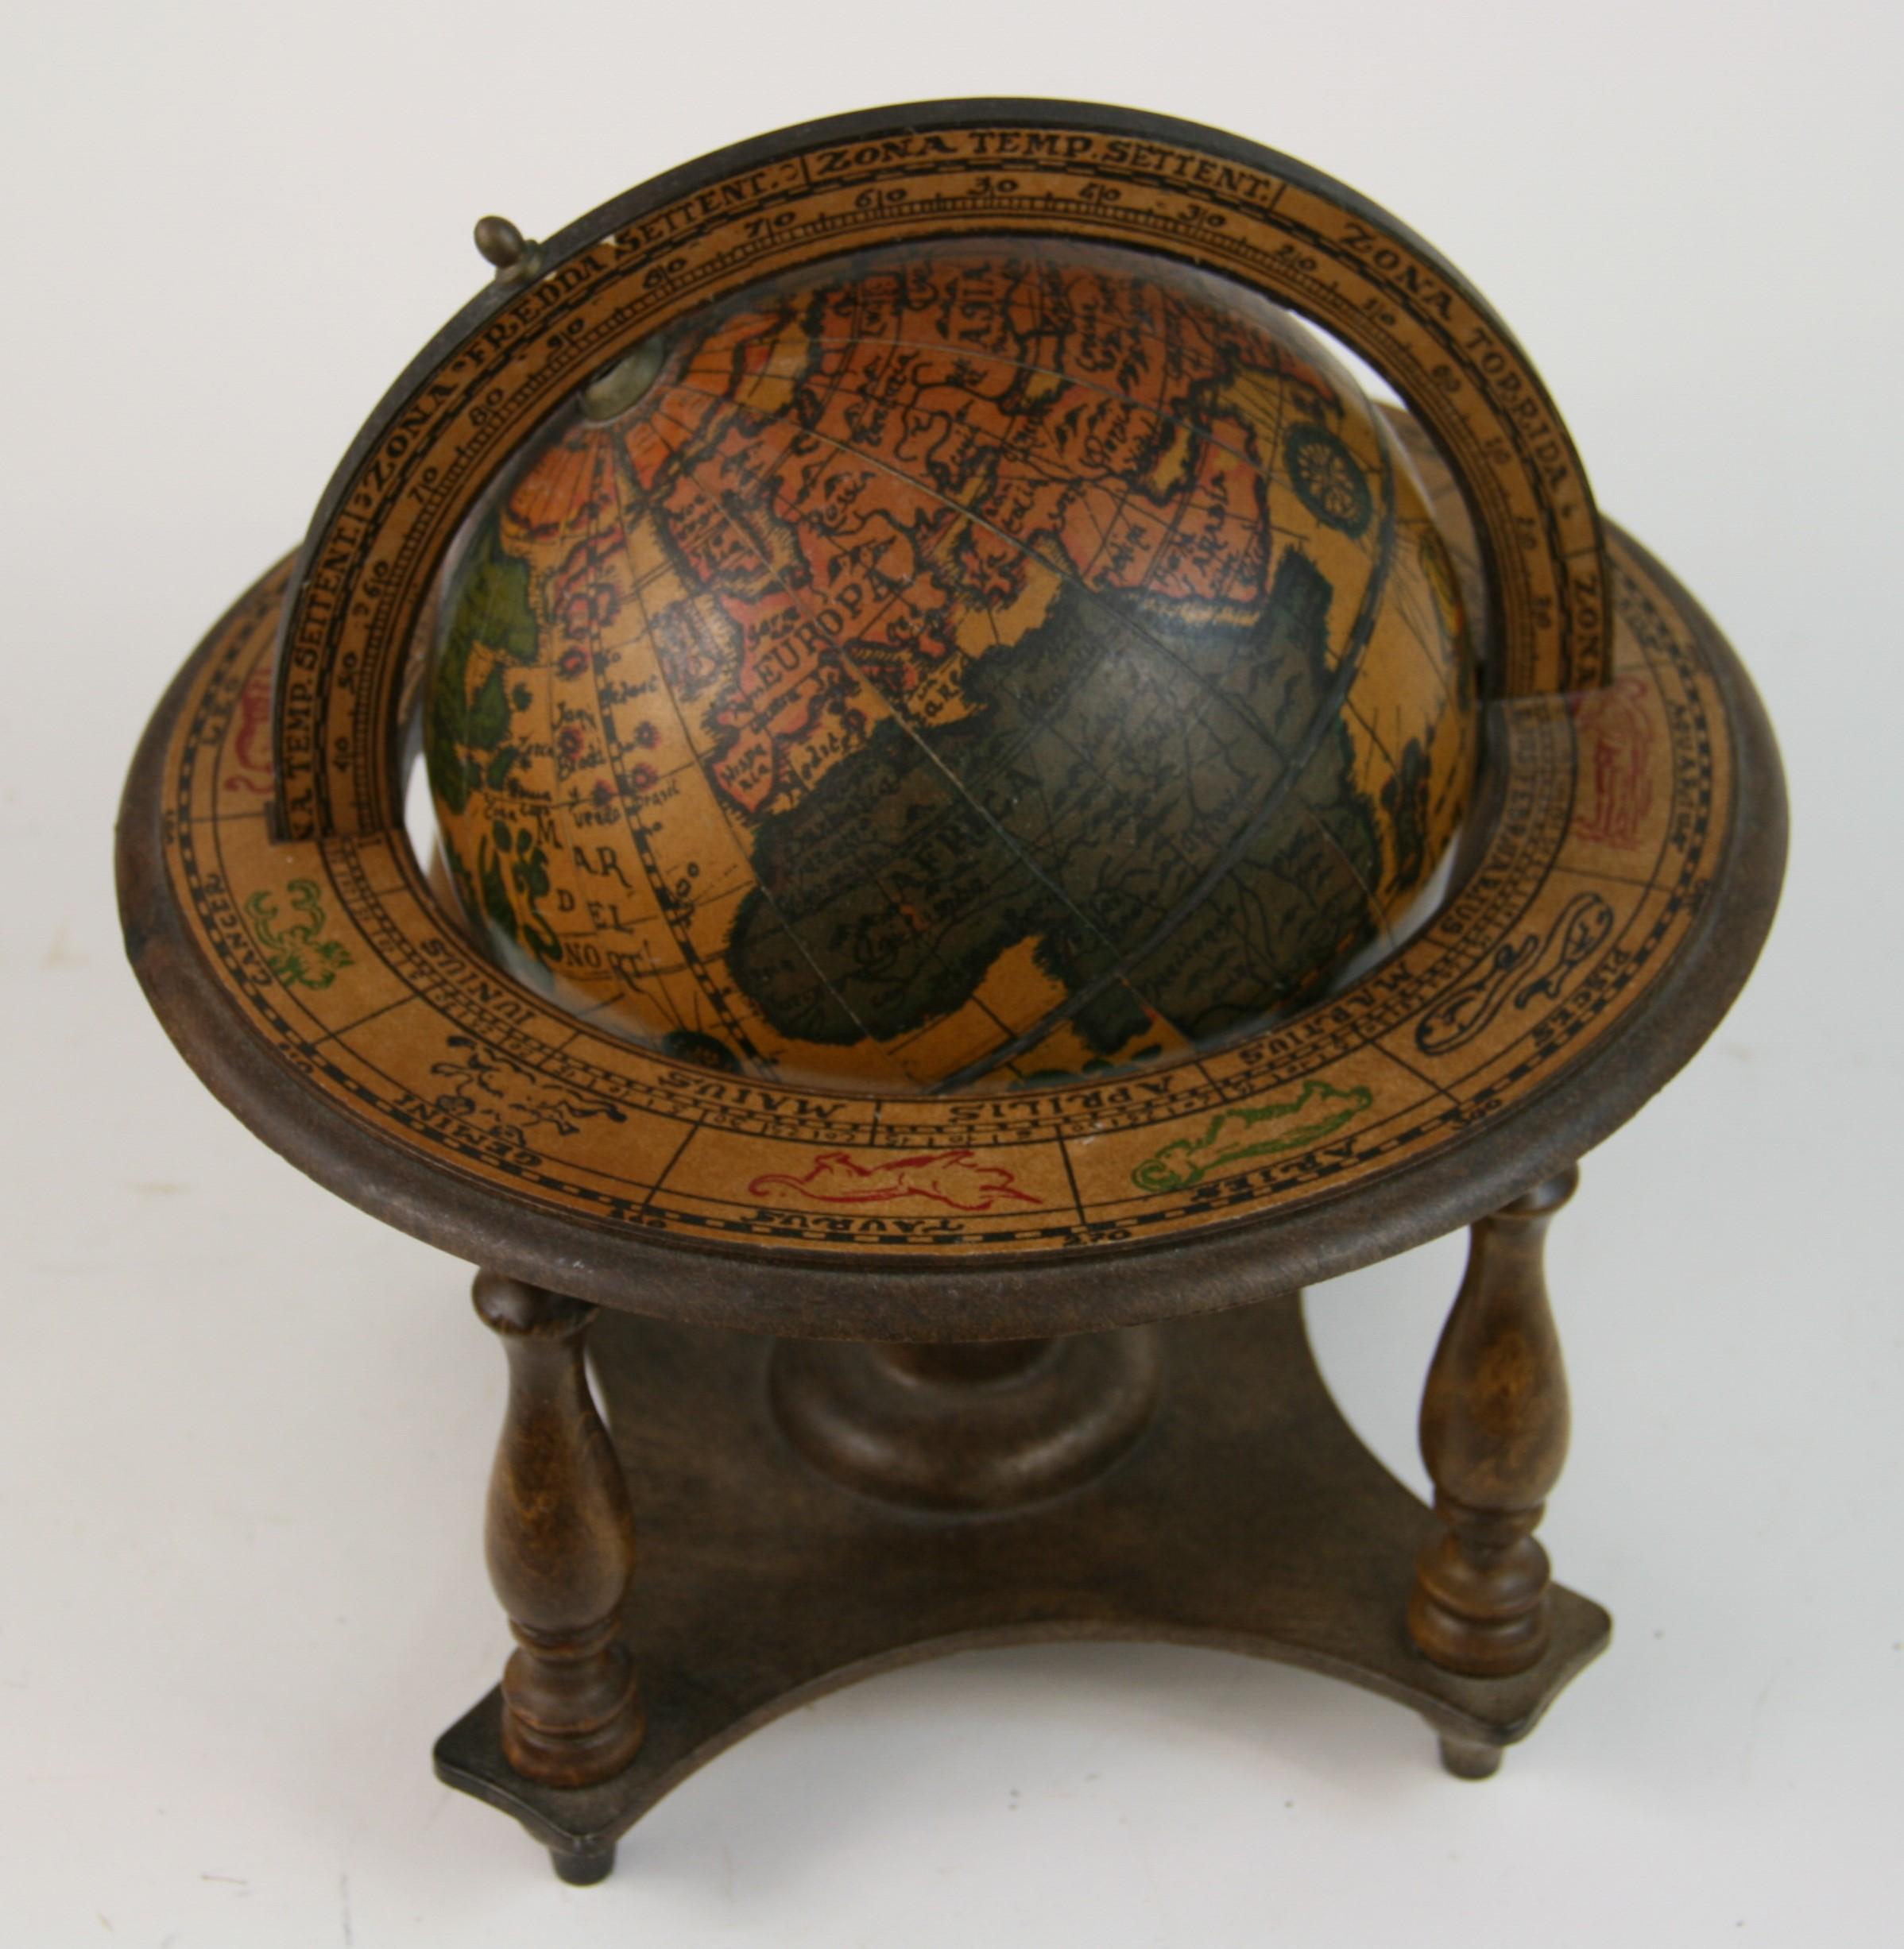 2-310 Italian globe with astrological signs is a reproduction of a globe originally made in Italy in 1507.